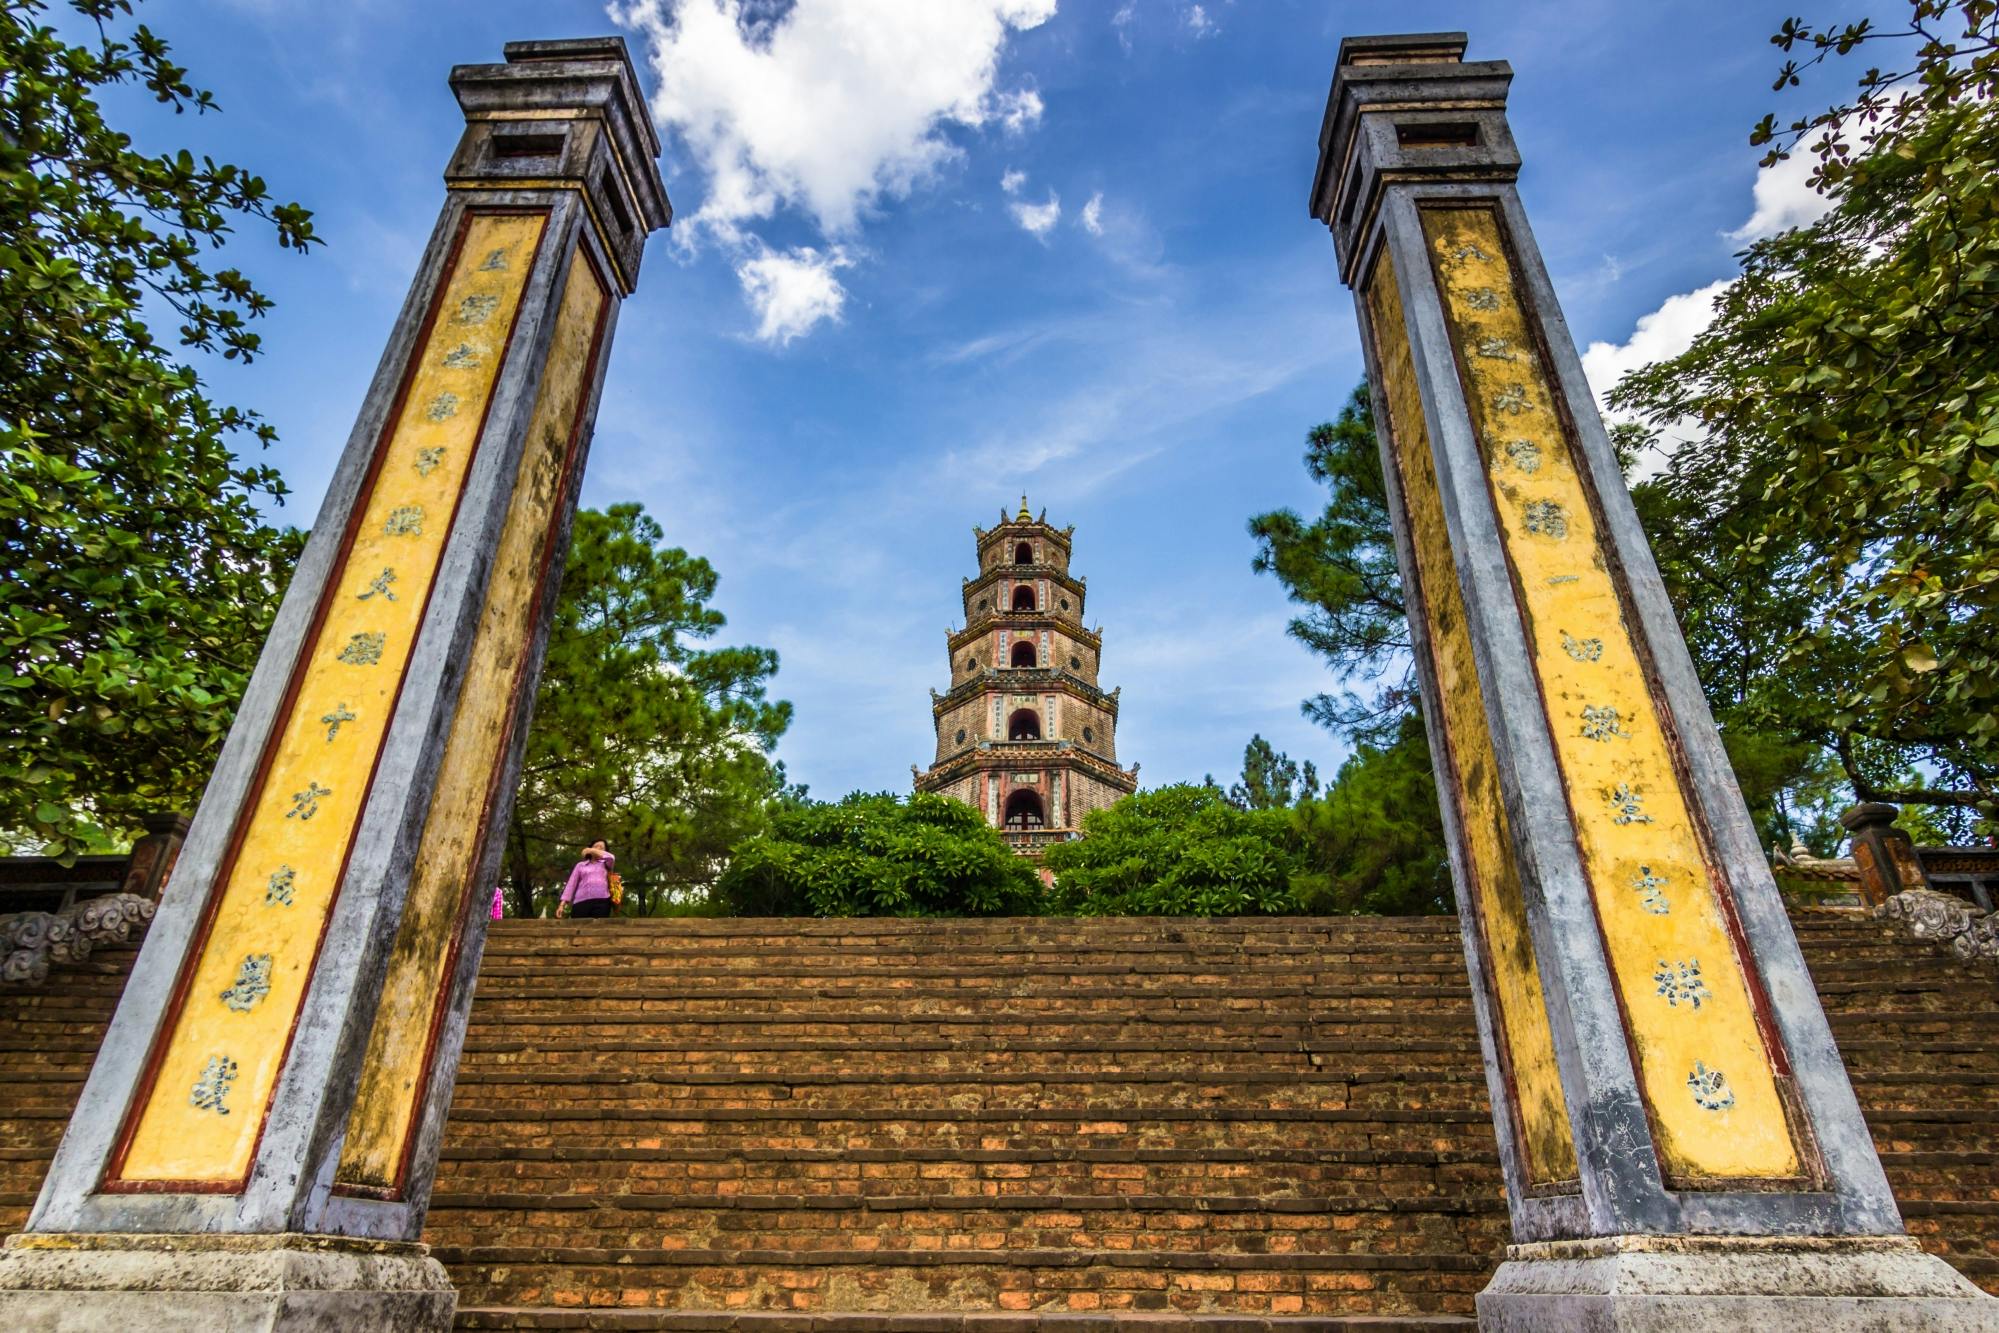 1-Day Guided Tour to Hue City from Hoi An with Lunch